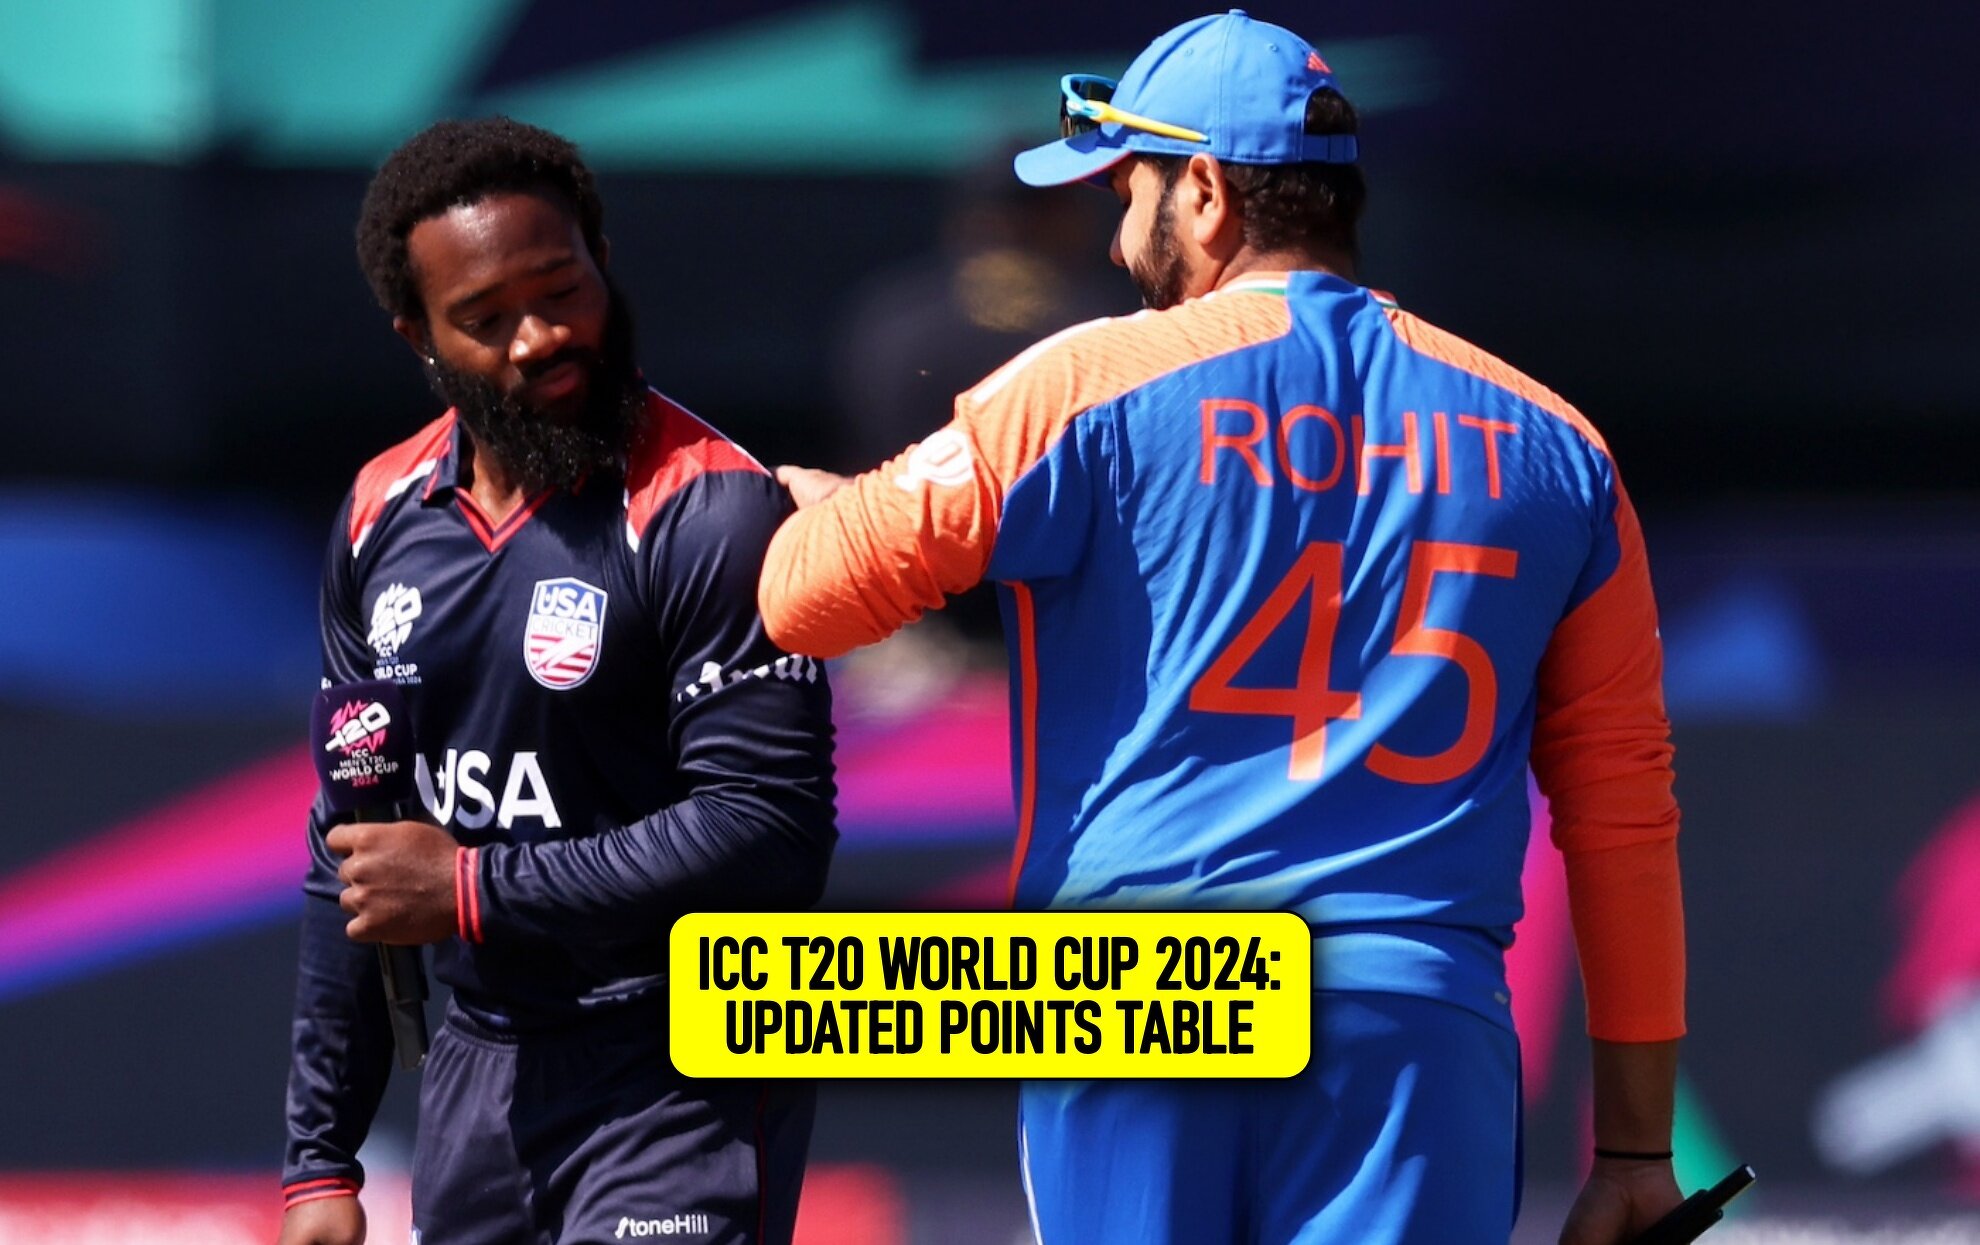 ICC T20 World Cup 2024 Points table, most runs & most wickets after